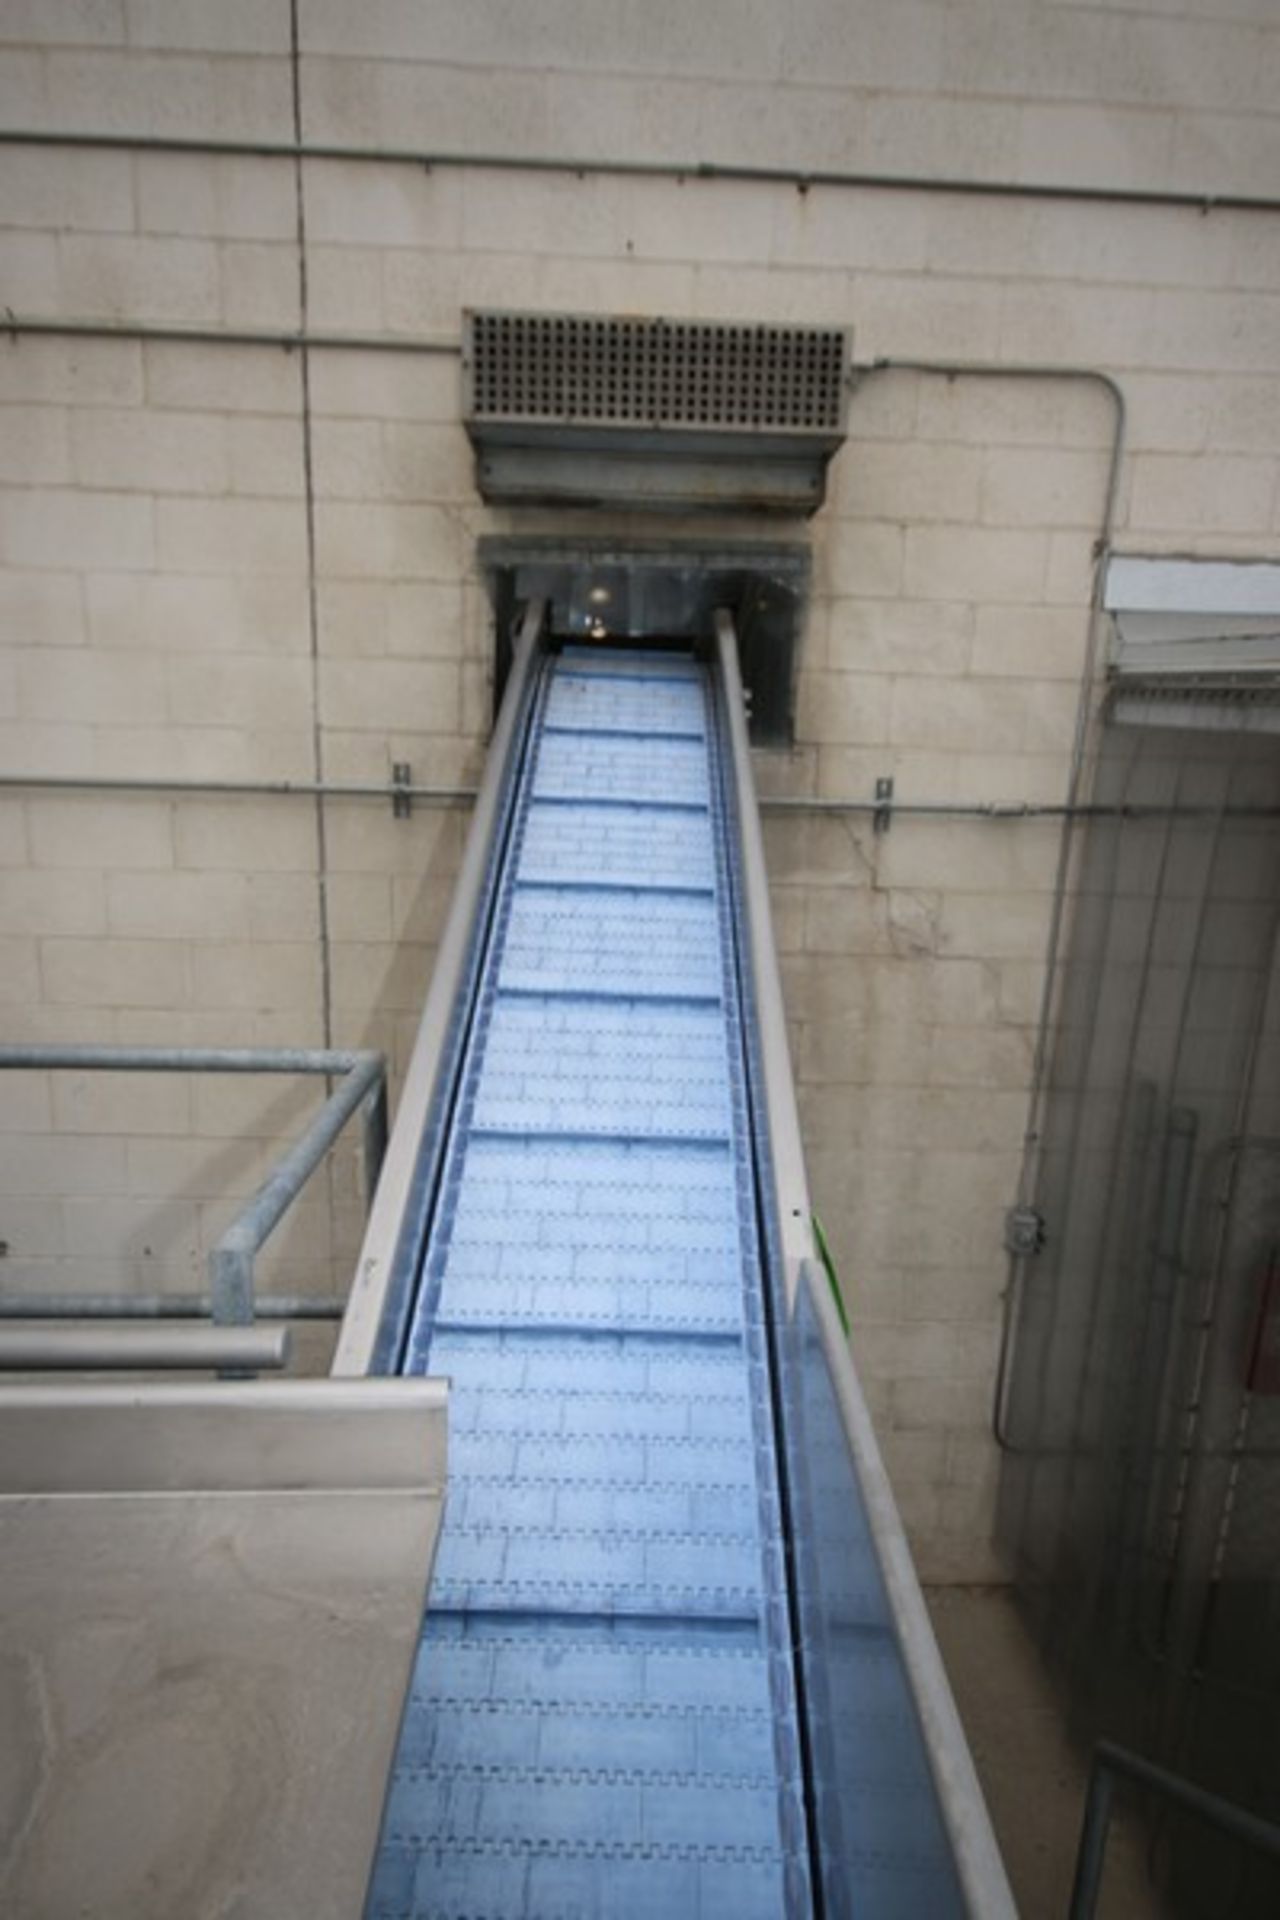 S/S Incline Conveyor with Flights, Aprox. 14' L x 18" W Belt, with 11-1/2" Flight spacing and S/S - Image 3 of 3